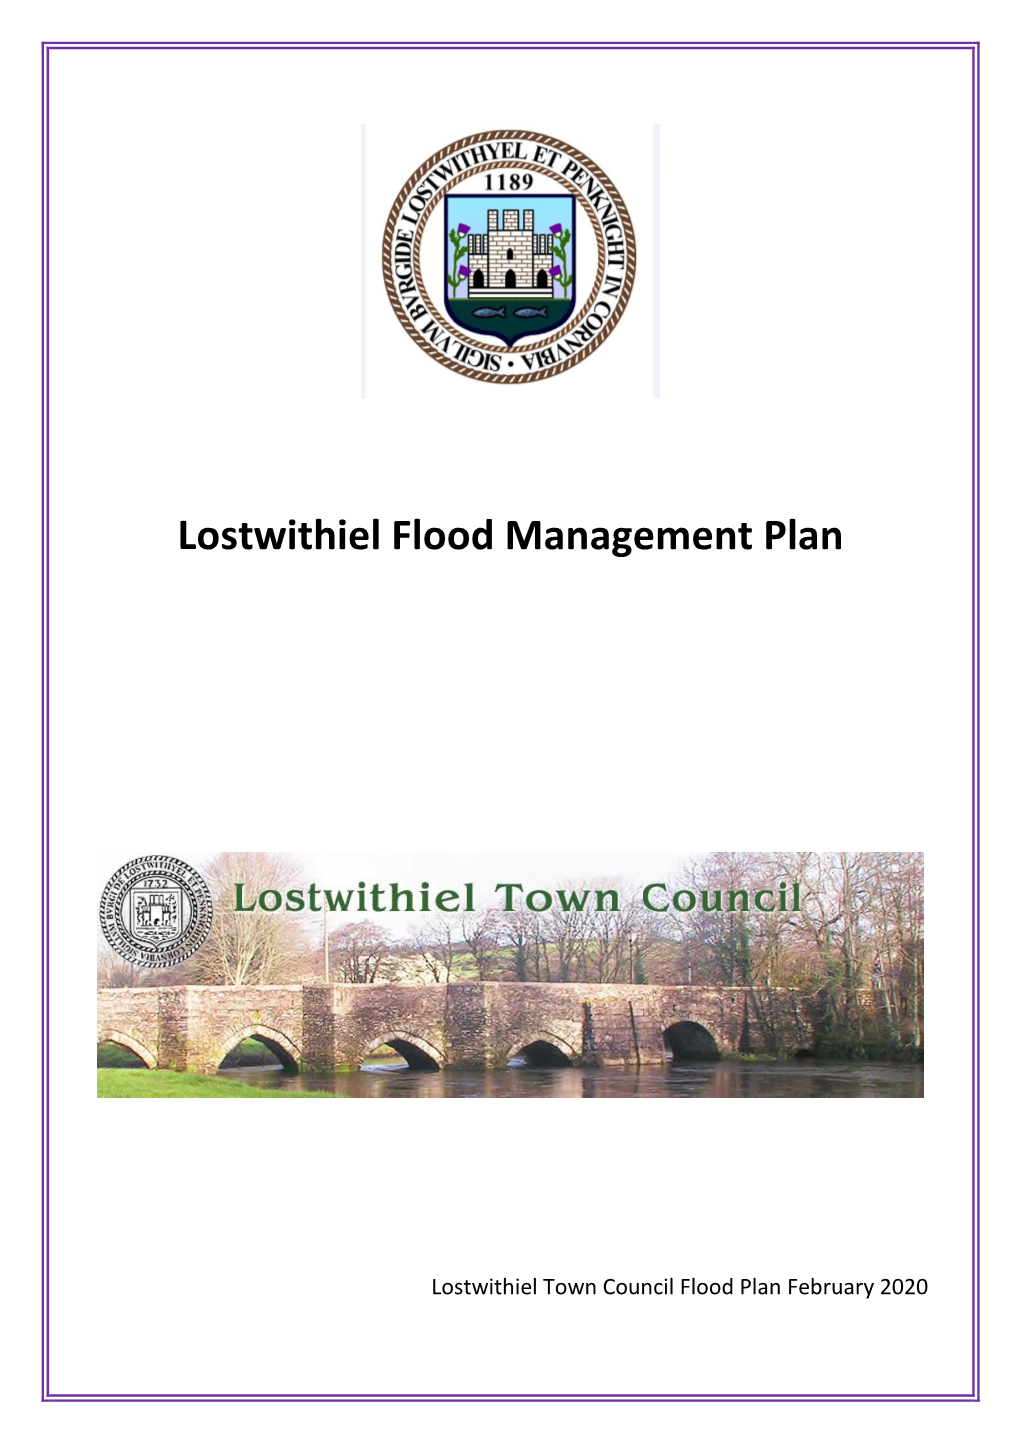 Lostwithiel Flood Plan, Community Resources, Emergency Services and the Local Authority